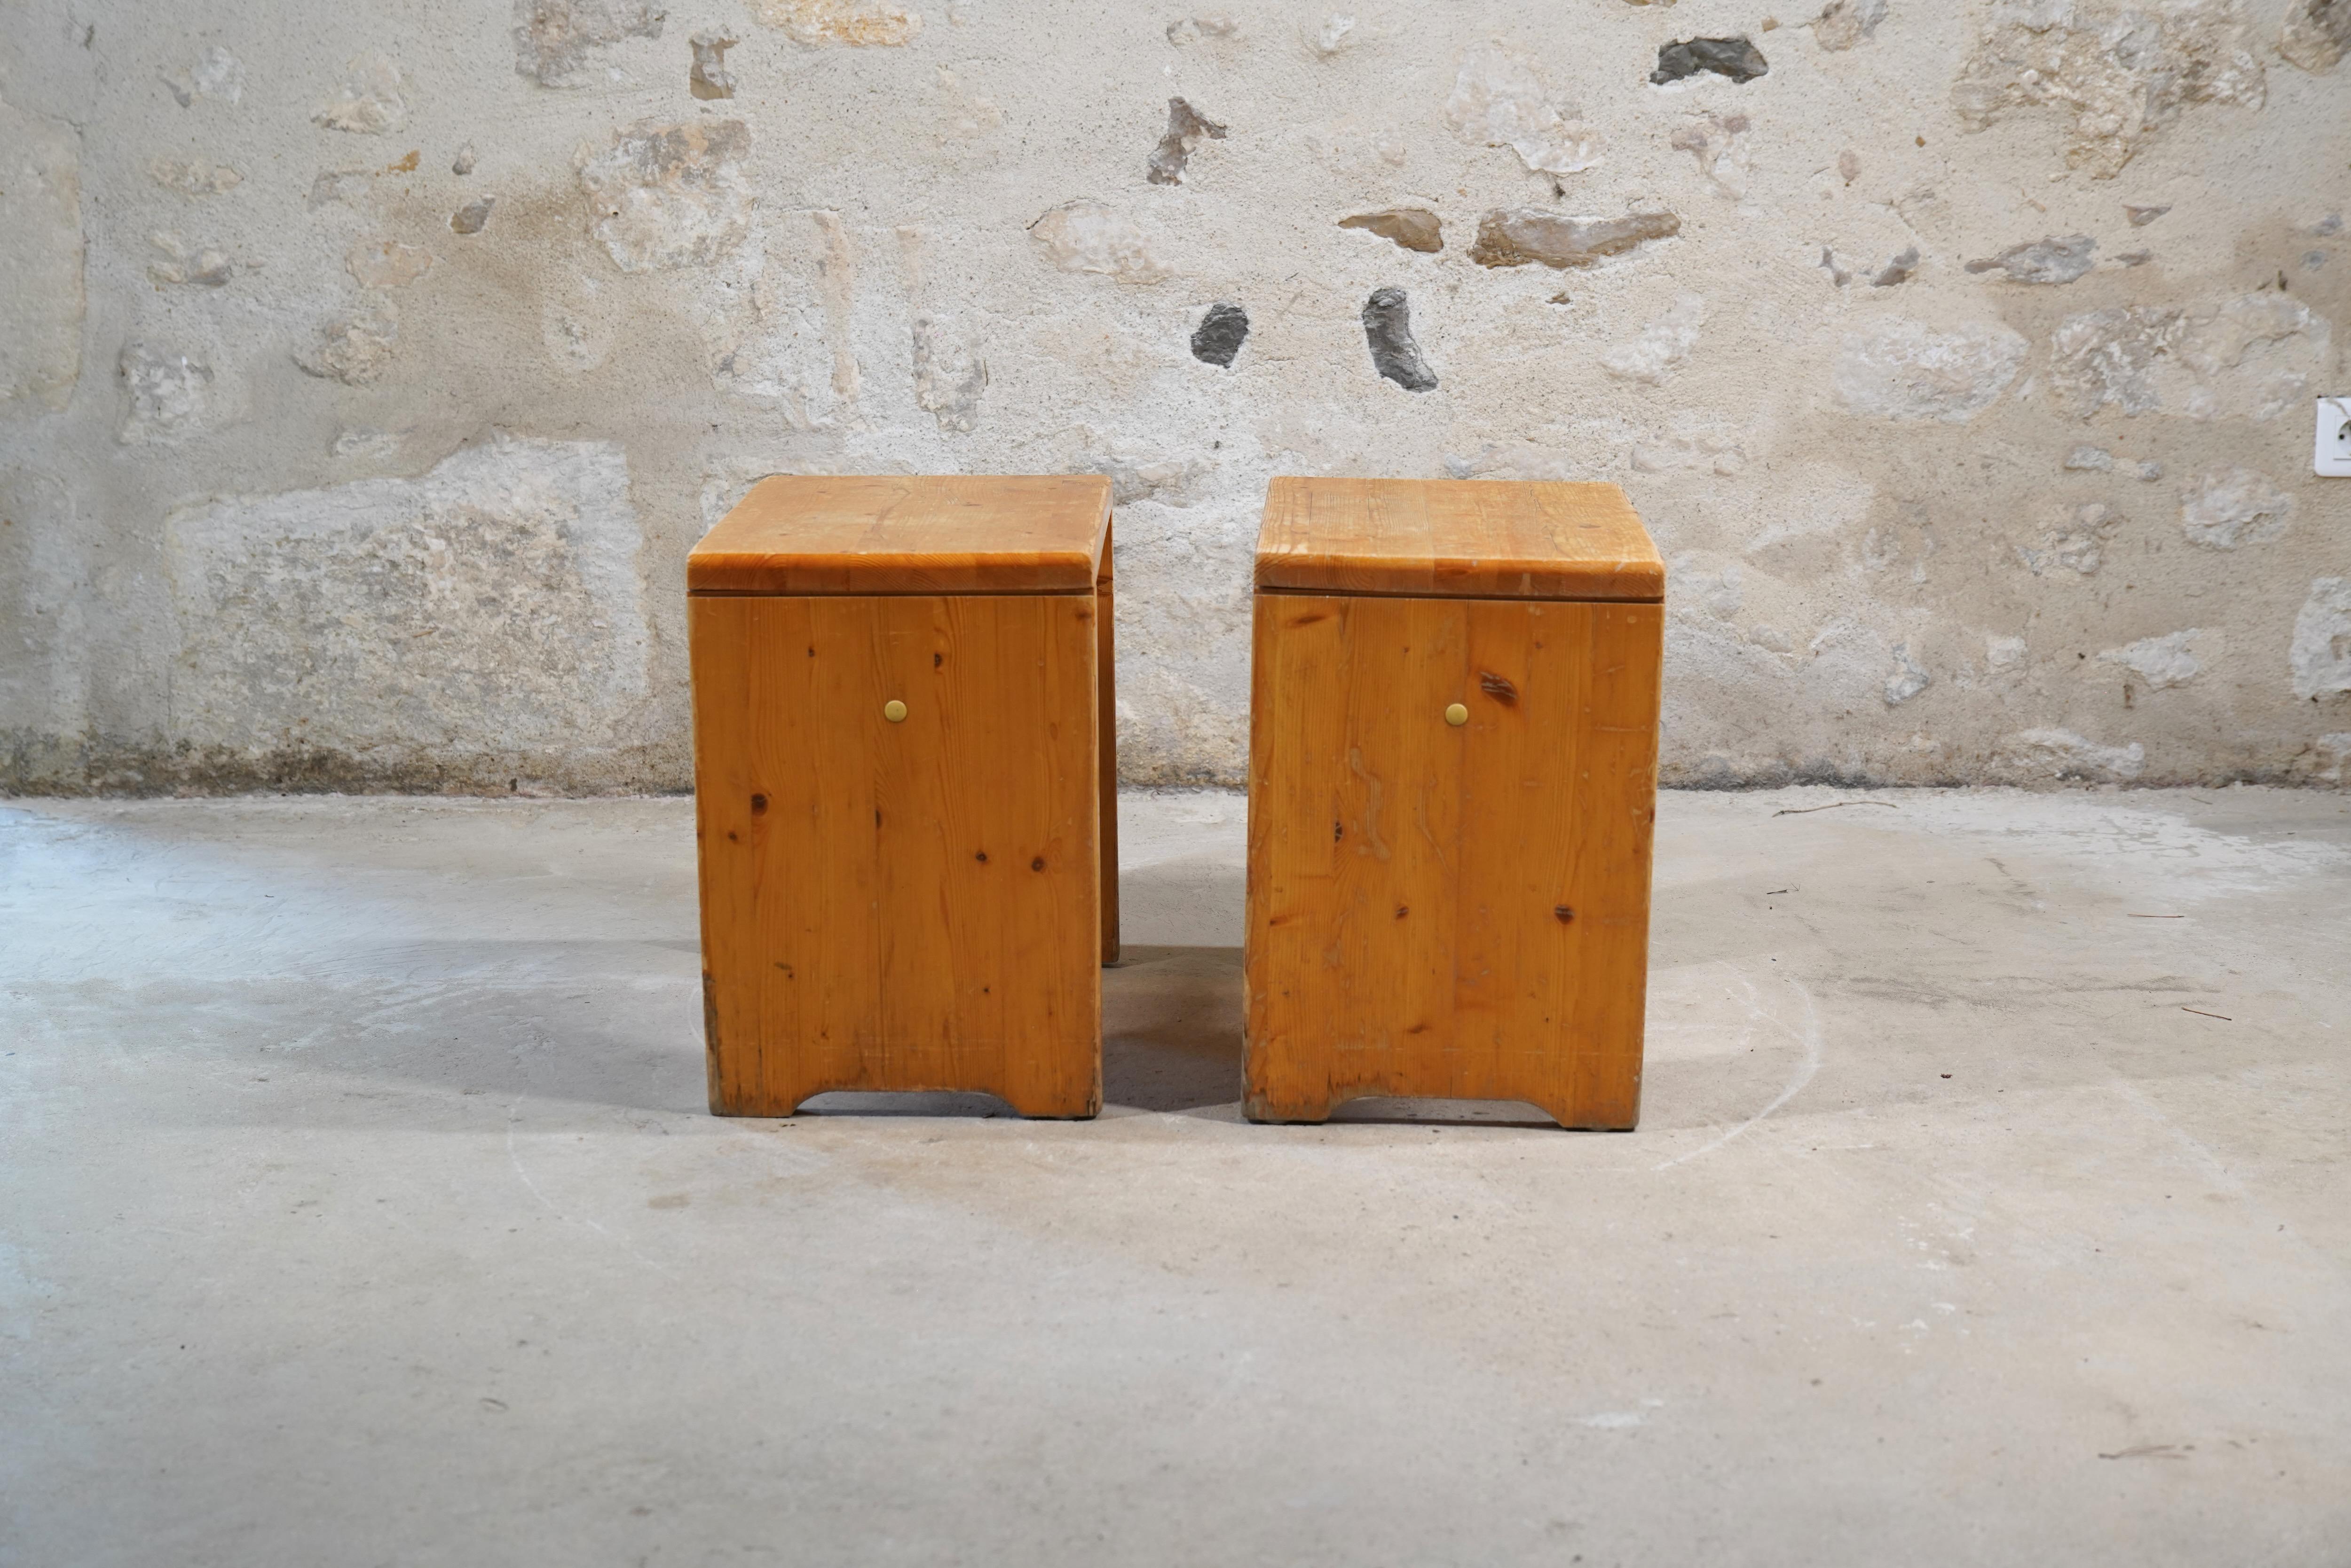 Mid-20th Century Charlotte Perriand Stools from Les Arcs, France circa 1968 (4 Available) For Sale